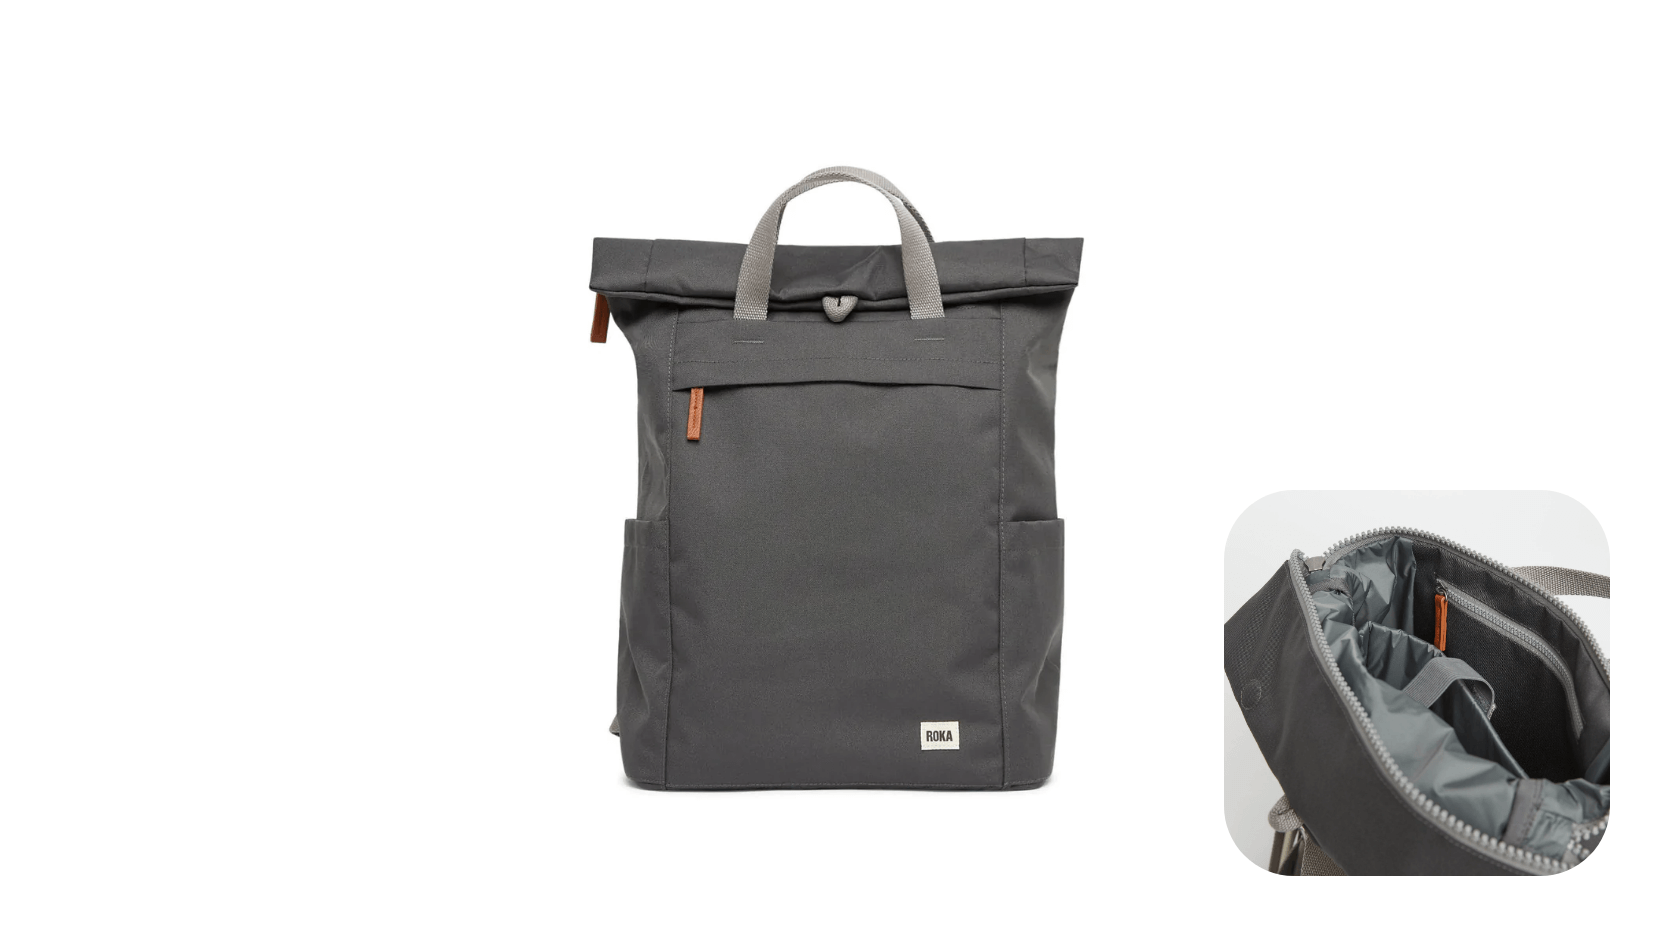 Roka Finchley A Large Sustainable Carbon Backpack